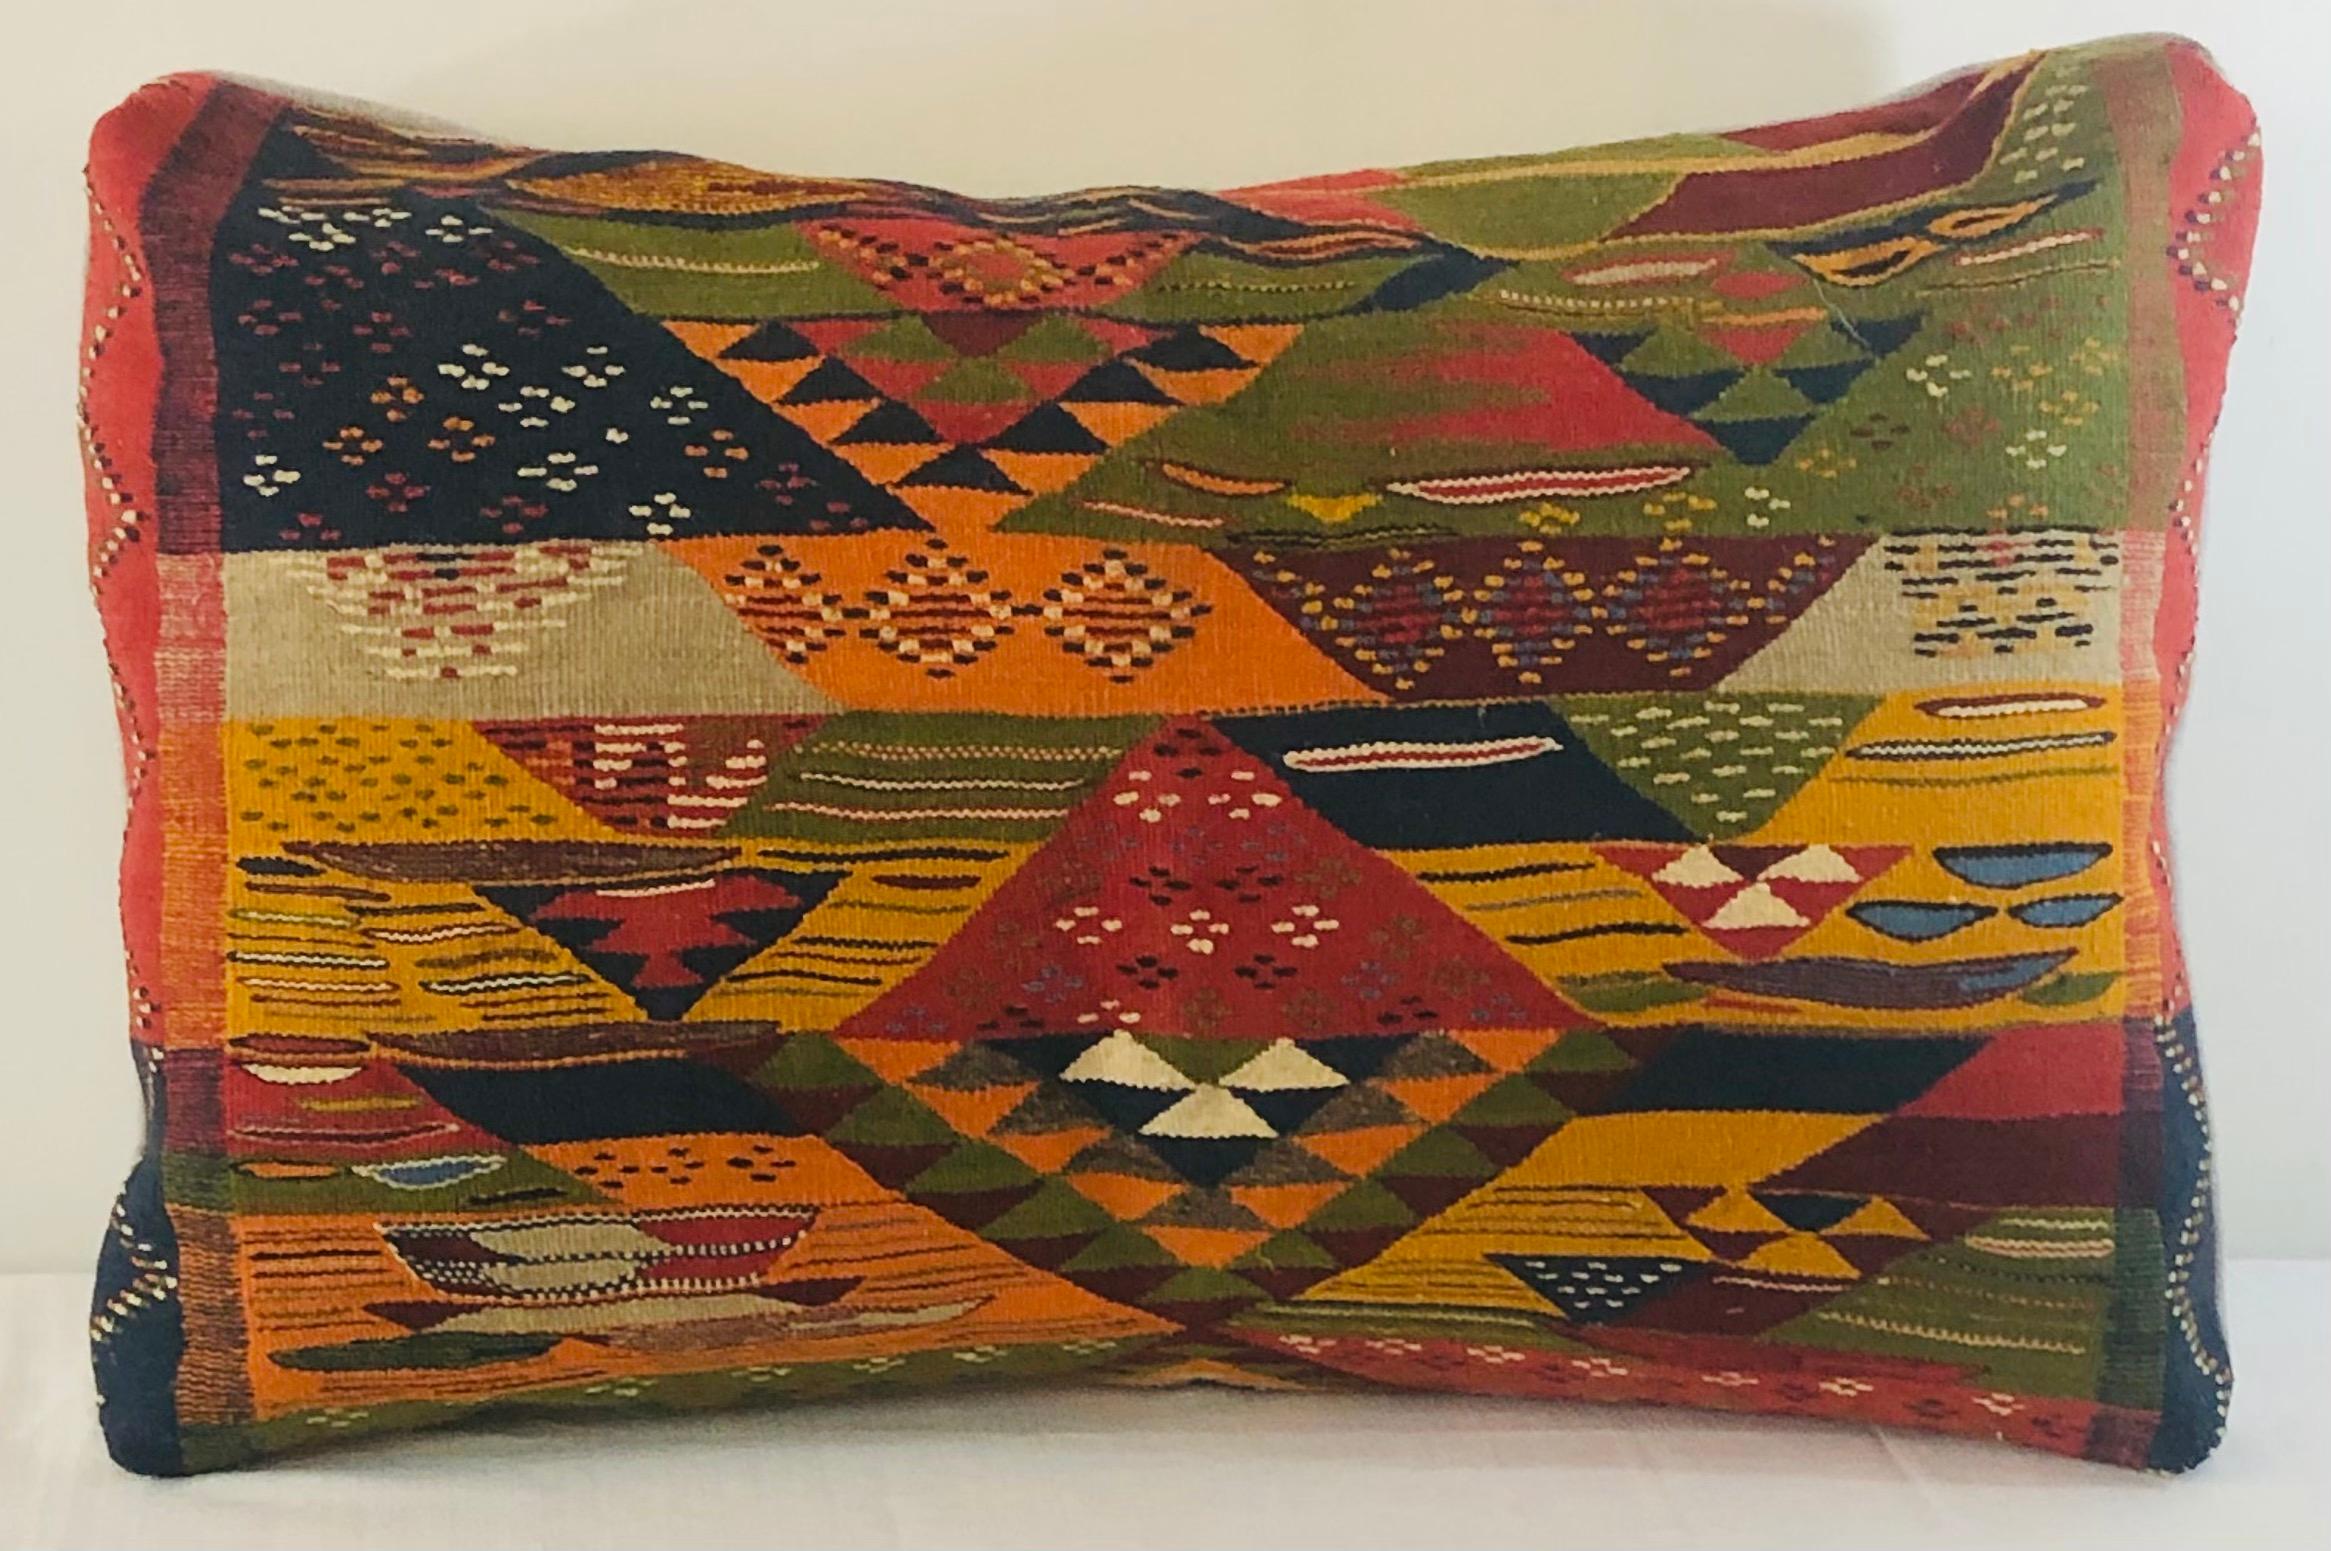 Featuring vivid dark blue, off white, earthy burgundy and green colors, this stunning one-of-a-kind pair of Kilim pillows are custom made from a vintage Moroccan wool rug handwoven in the Atlas Mountains in Morocco by Berber women artisans.

This